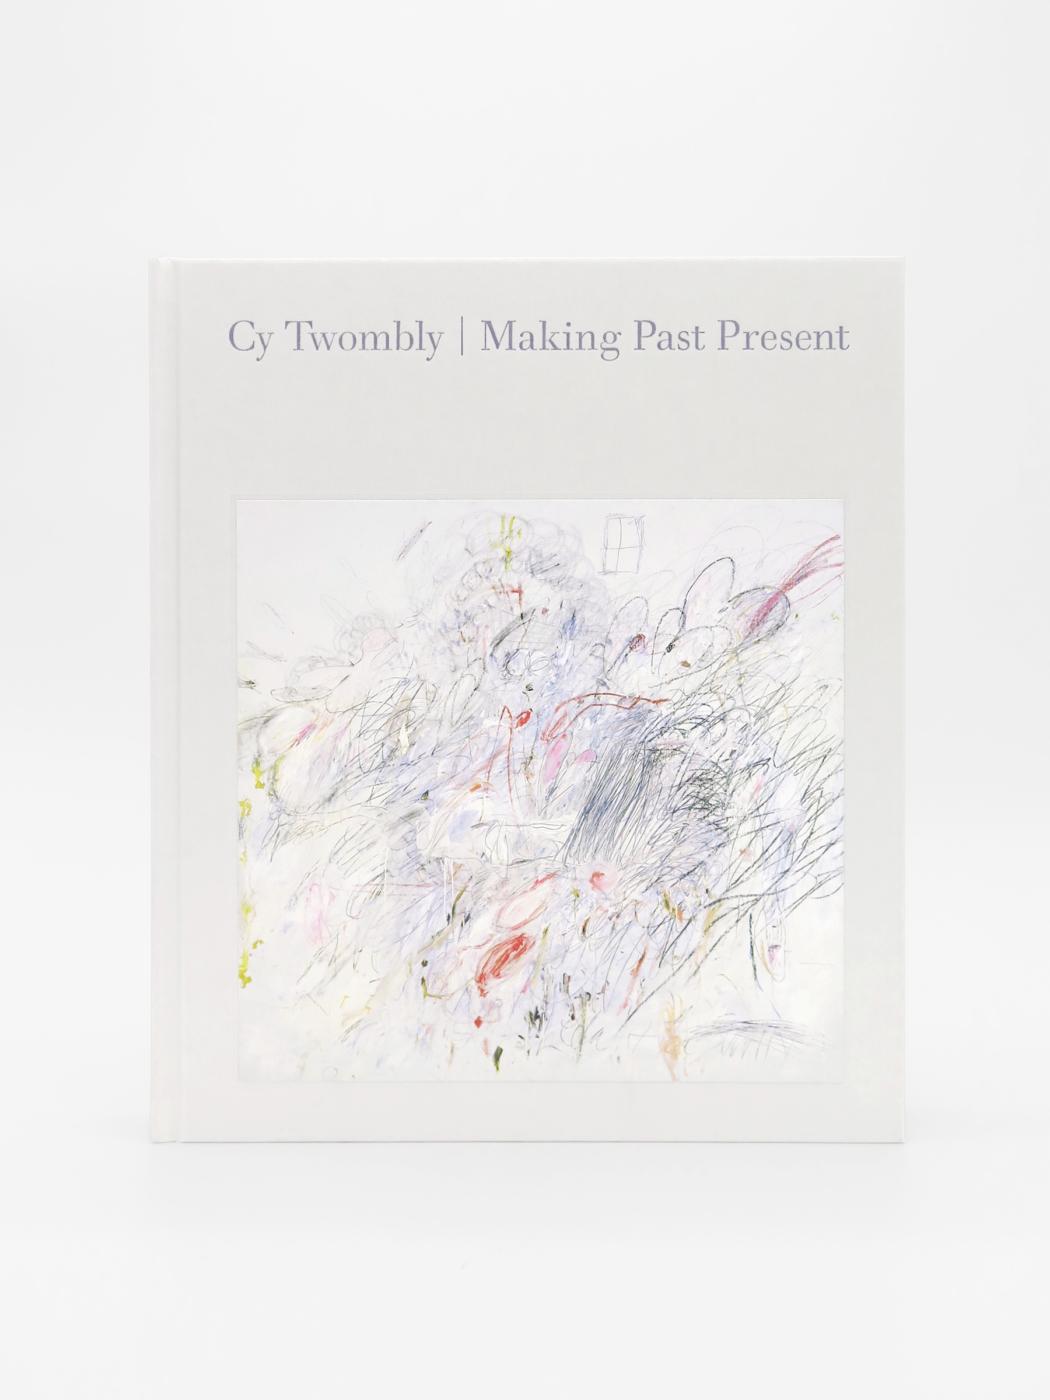 Cy Twombly, Making Past Present